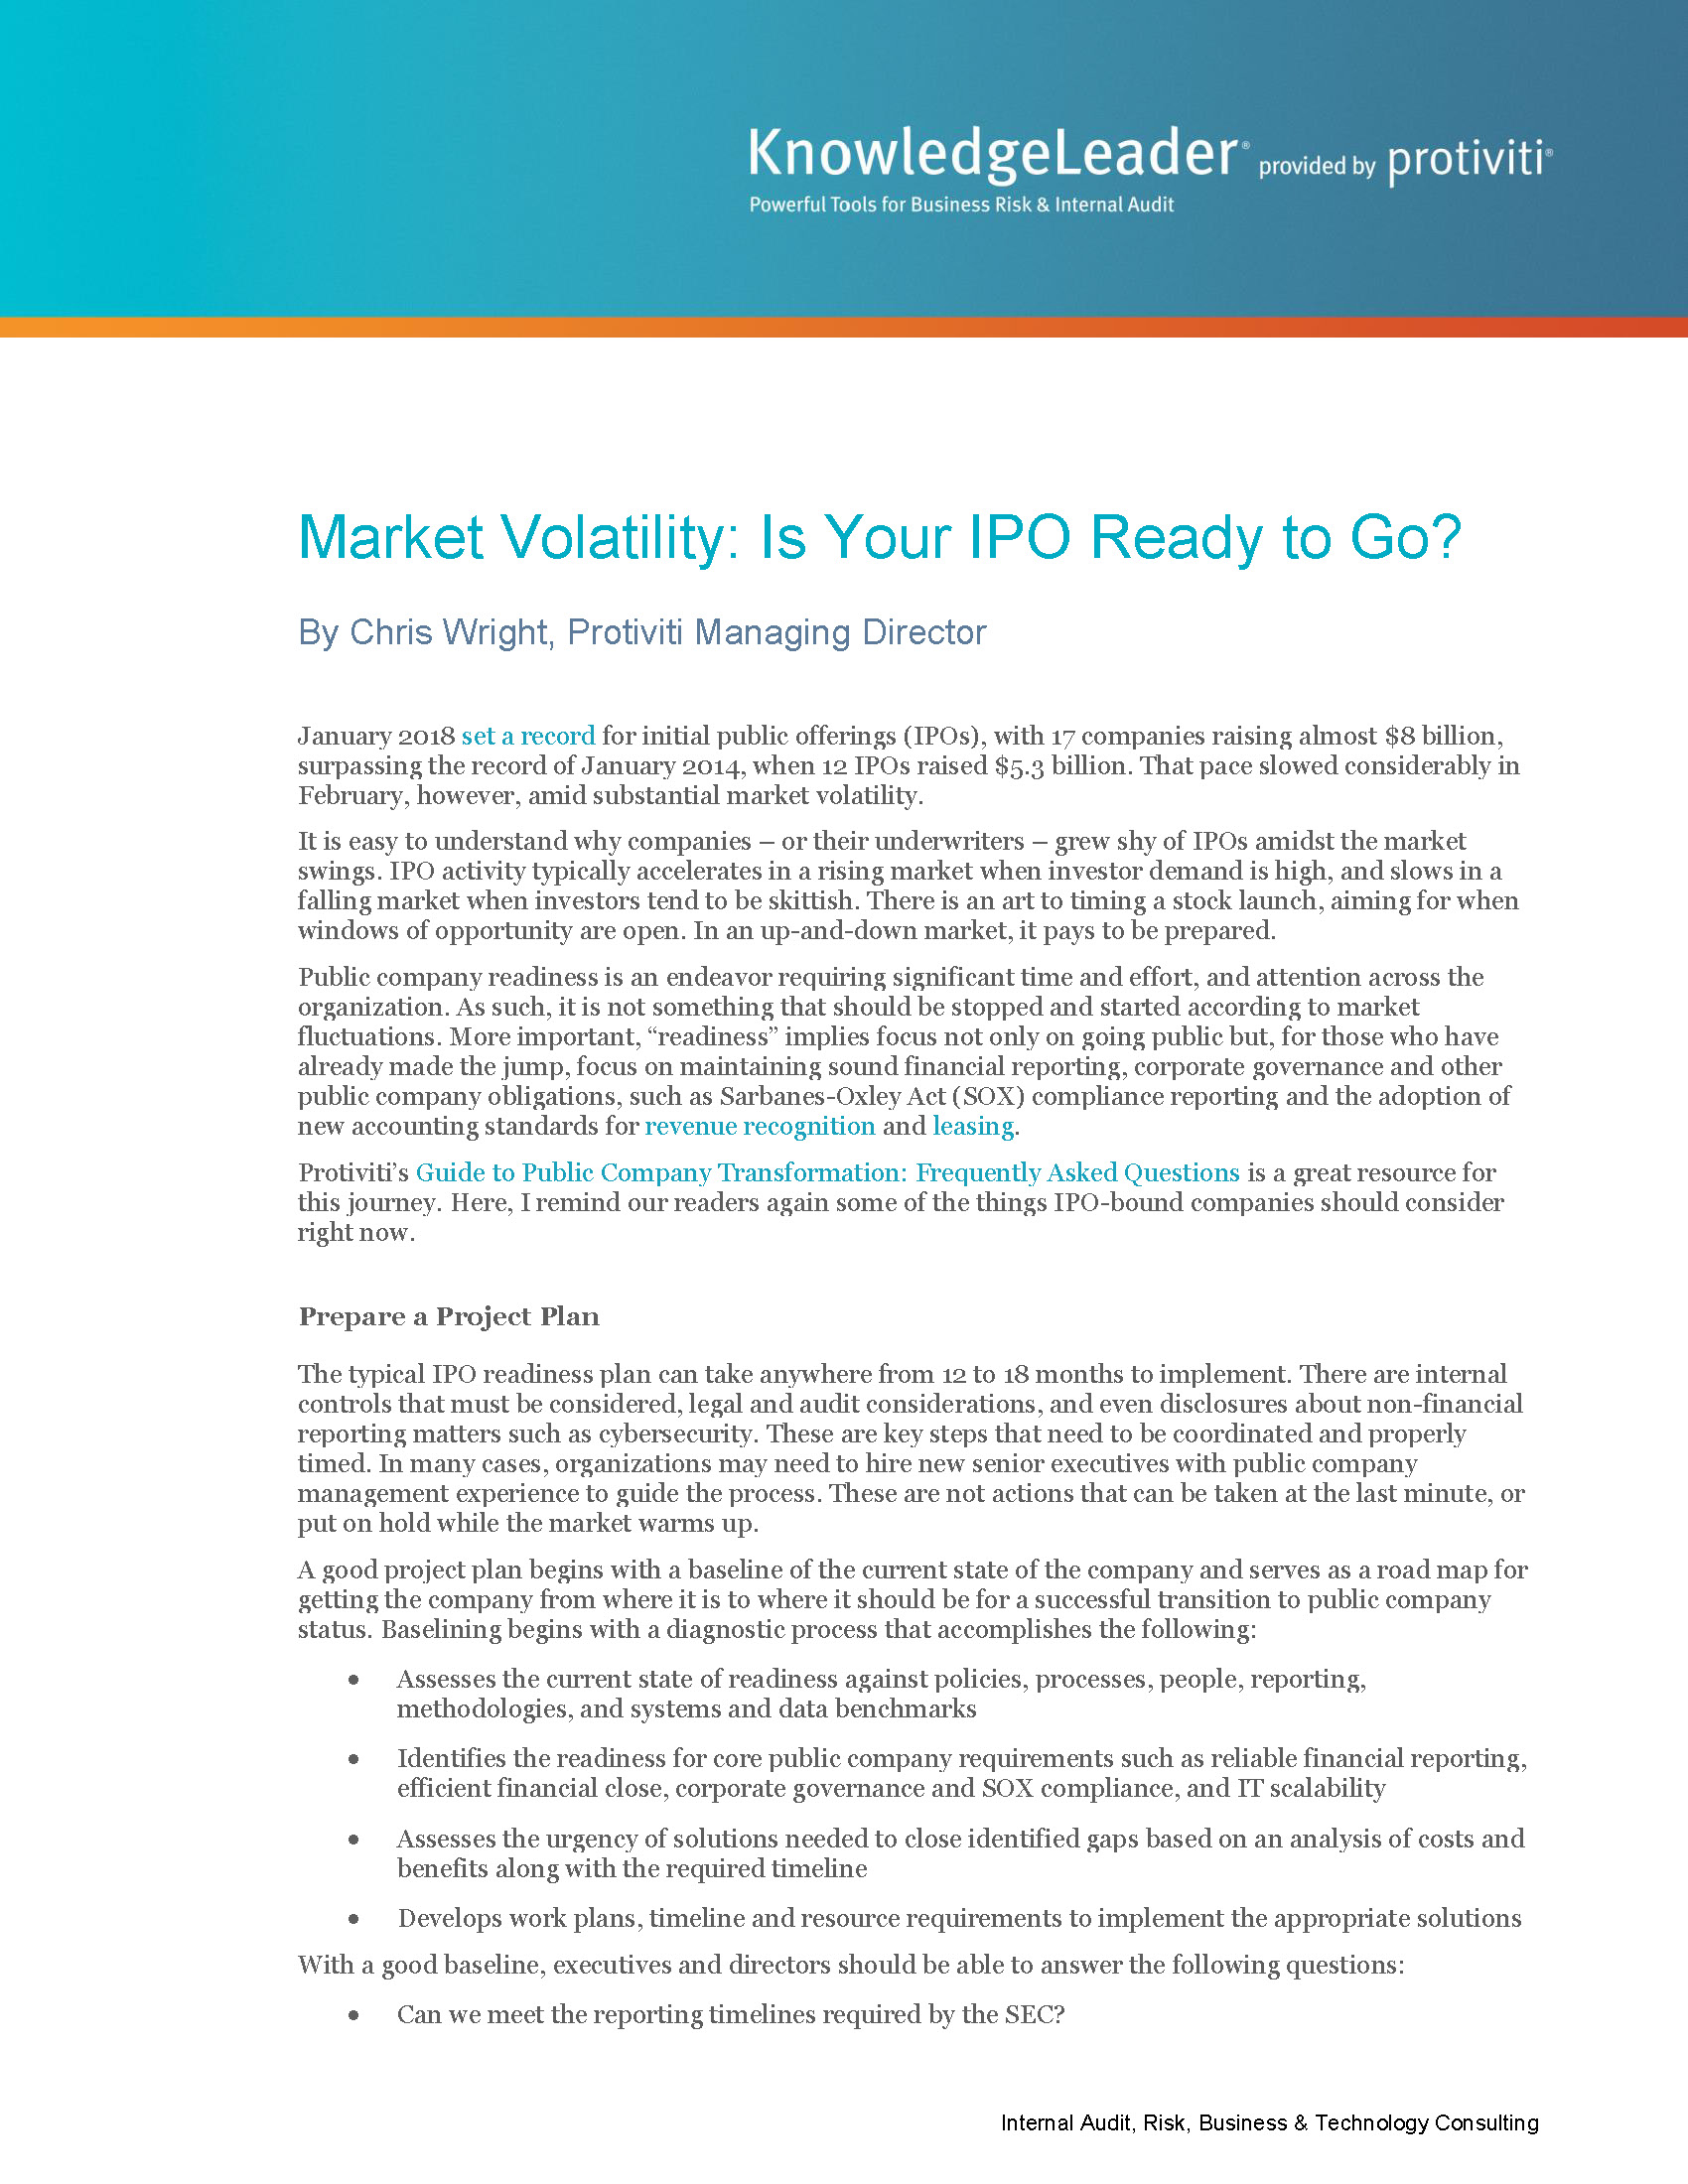 Screenshot of the first page of Market Volatility Is Your IPO Ready to Go